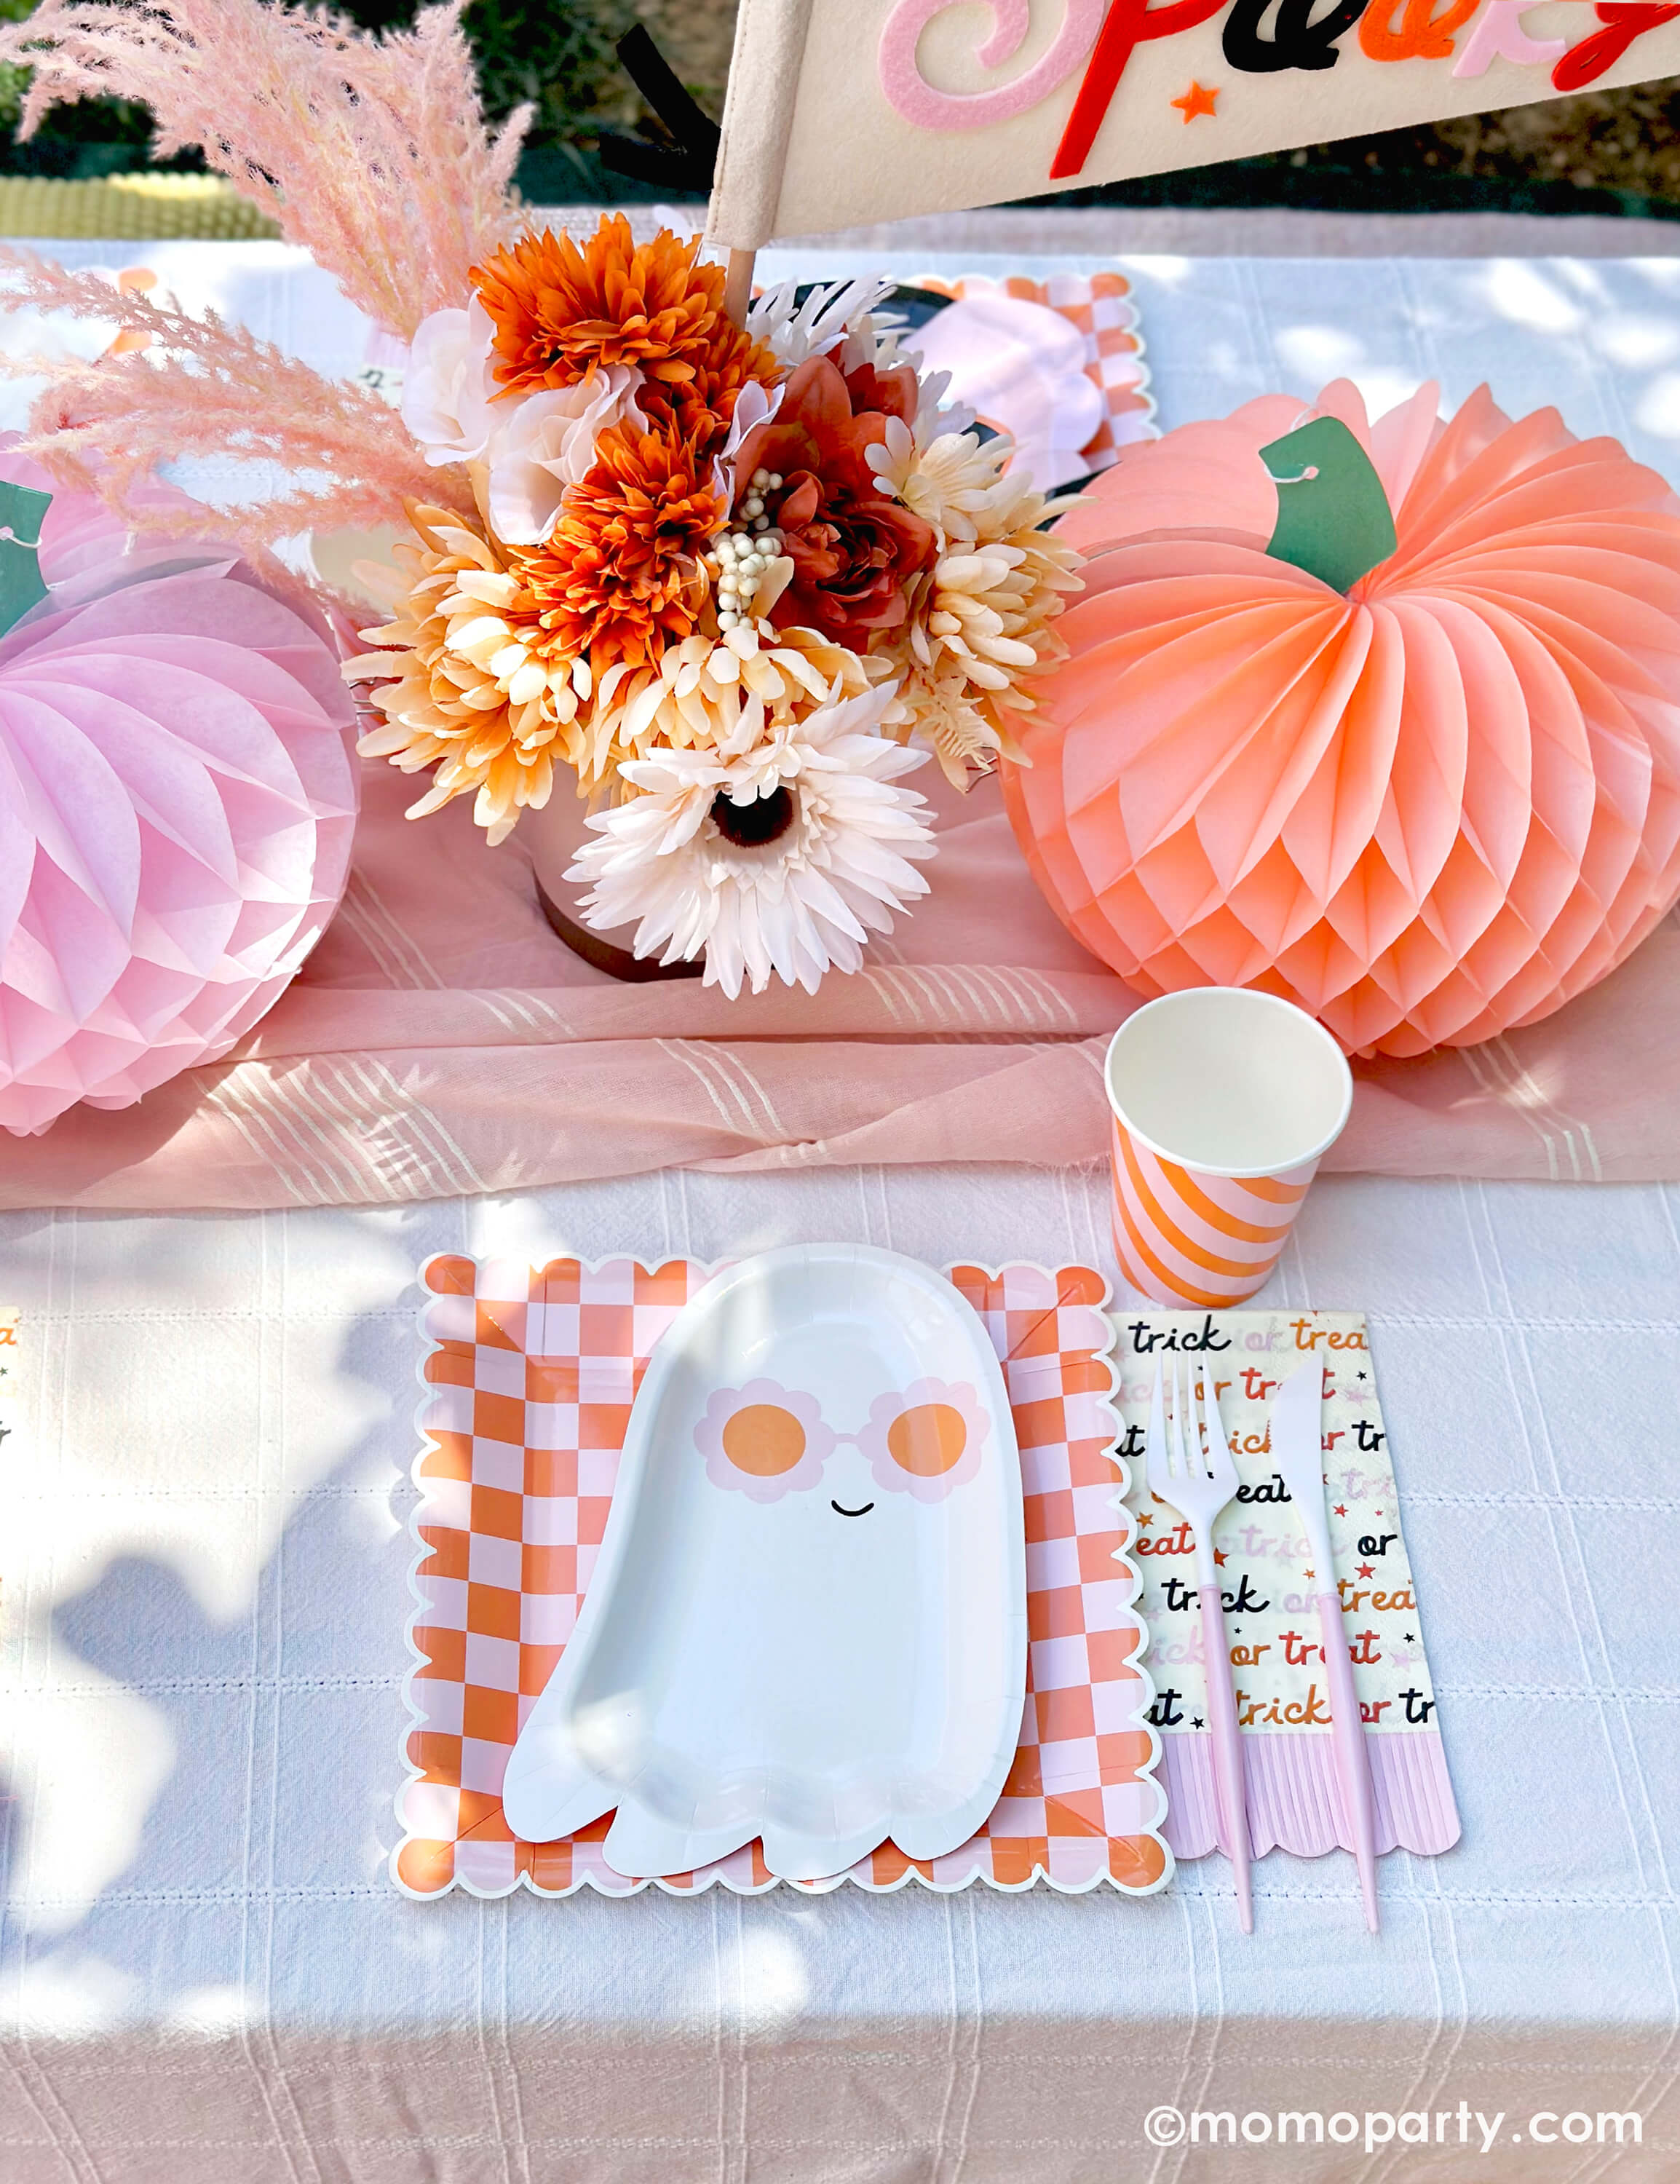 A pink Halloween table featuring Momo Party's pink sunny ghost shaped plates paired with orange/pink checkered plates, trick or treat patterned napkins with pastel pink fridge and blush and white cutlery, with boho vibe fall flower arrangement and pastel peach and pink honeycomb pumpkins as the centerpiece, and a felt party pennant that has "spooky" written on, this tablescape gives a great inspiration for a modern and chic Halloween party table decoration ideas.